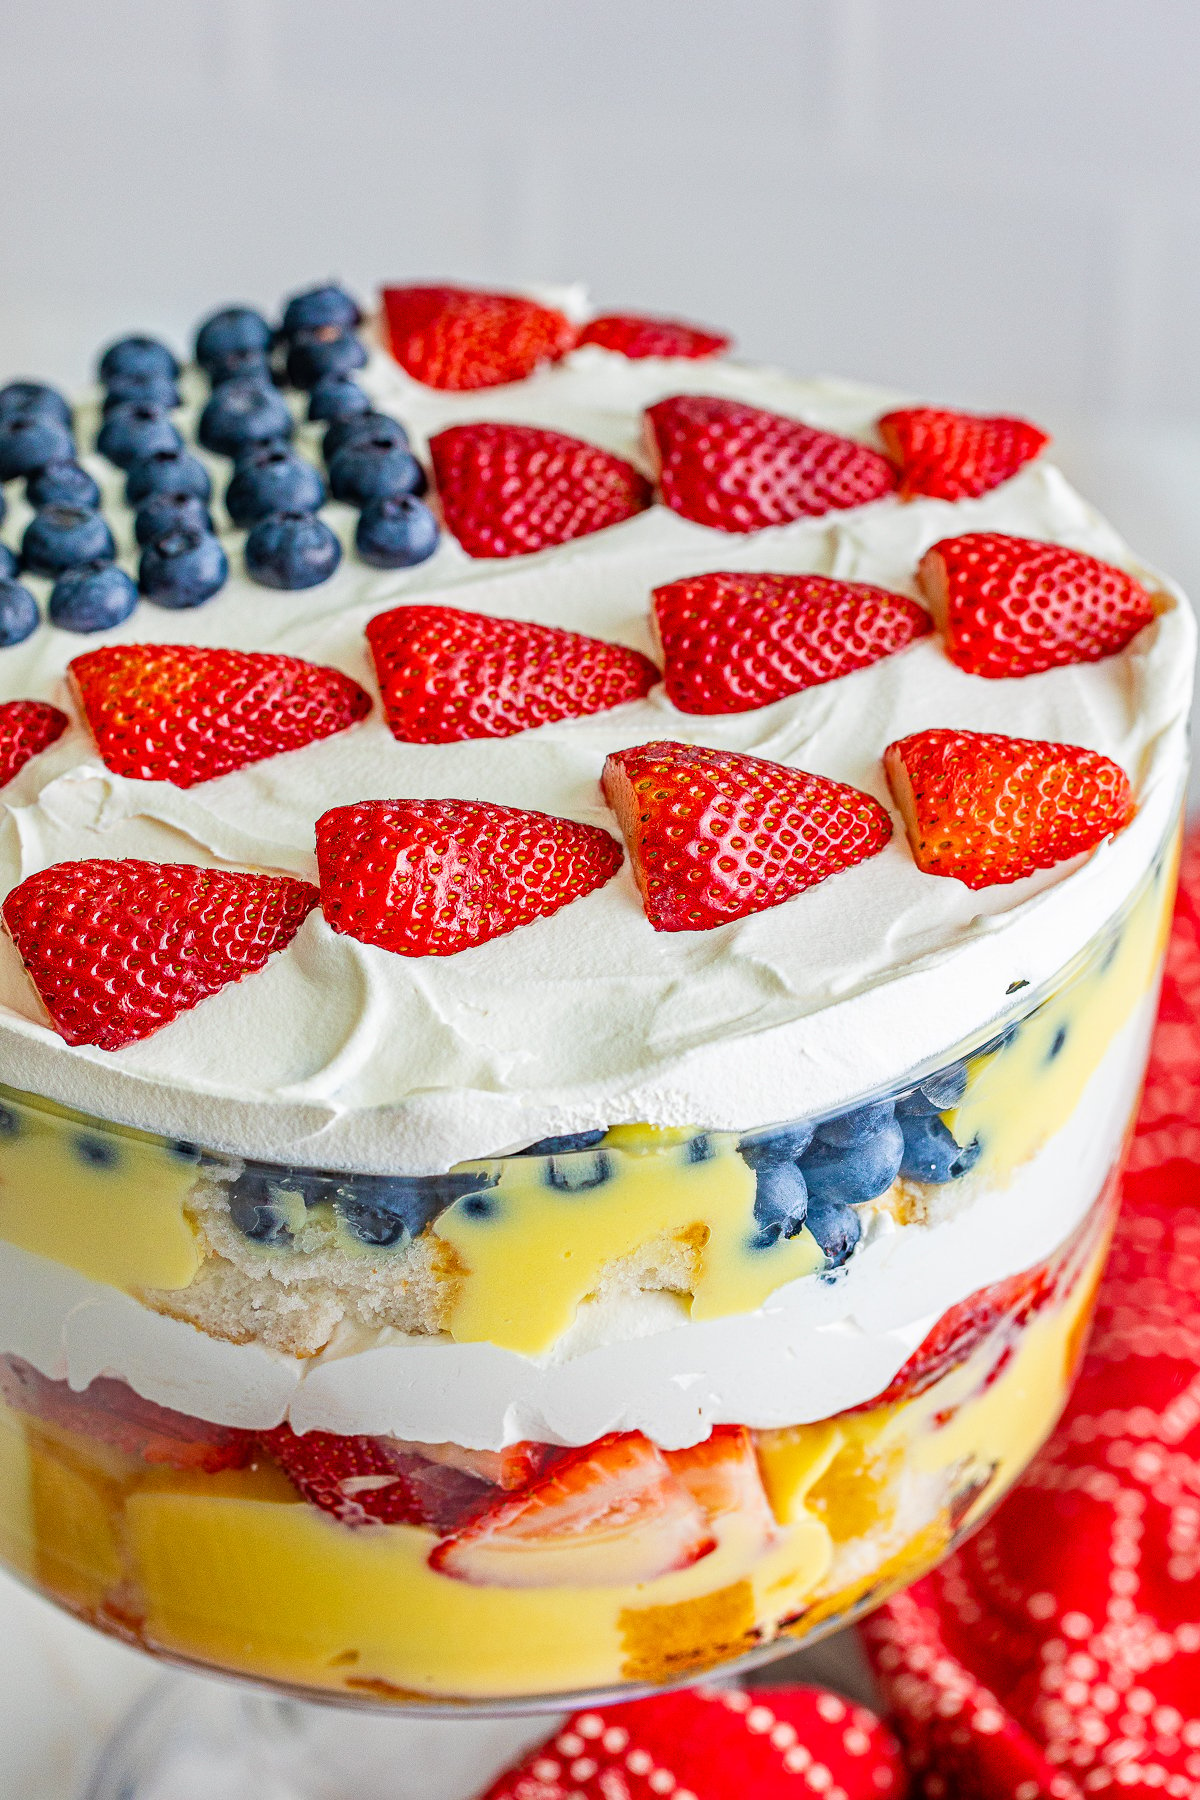 Finished Trifle showing layers, topped with a flag design.